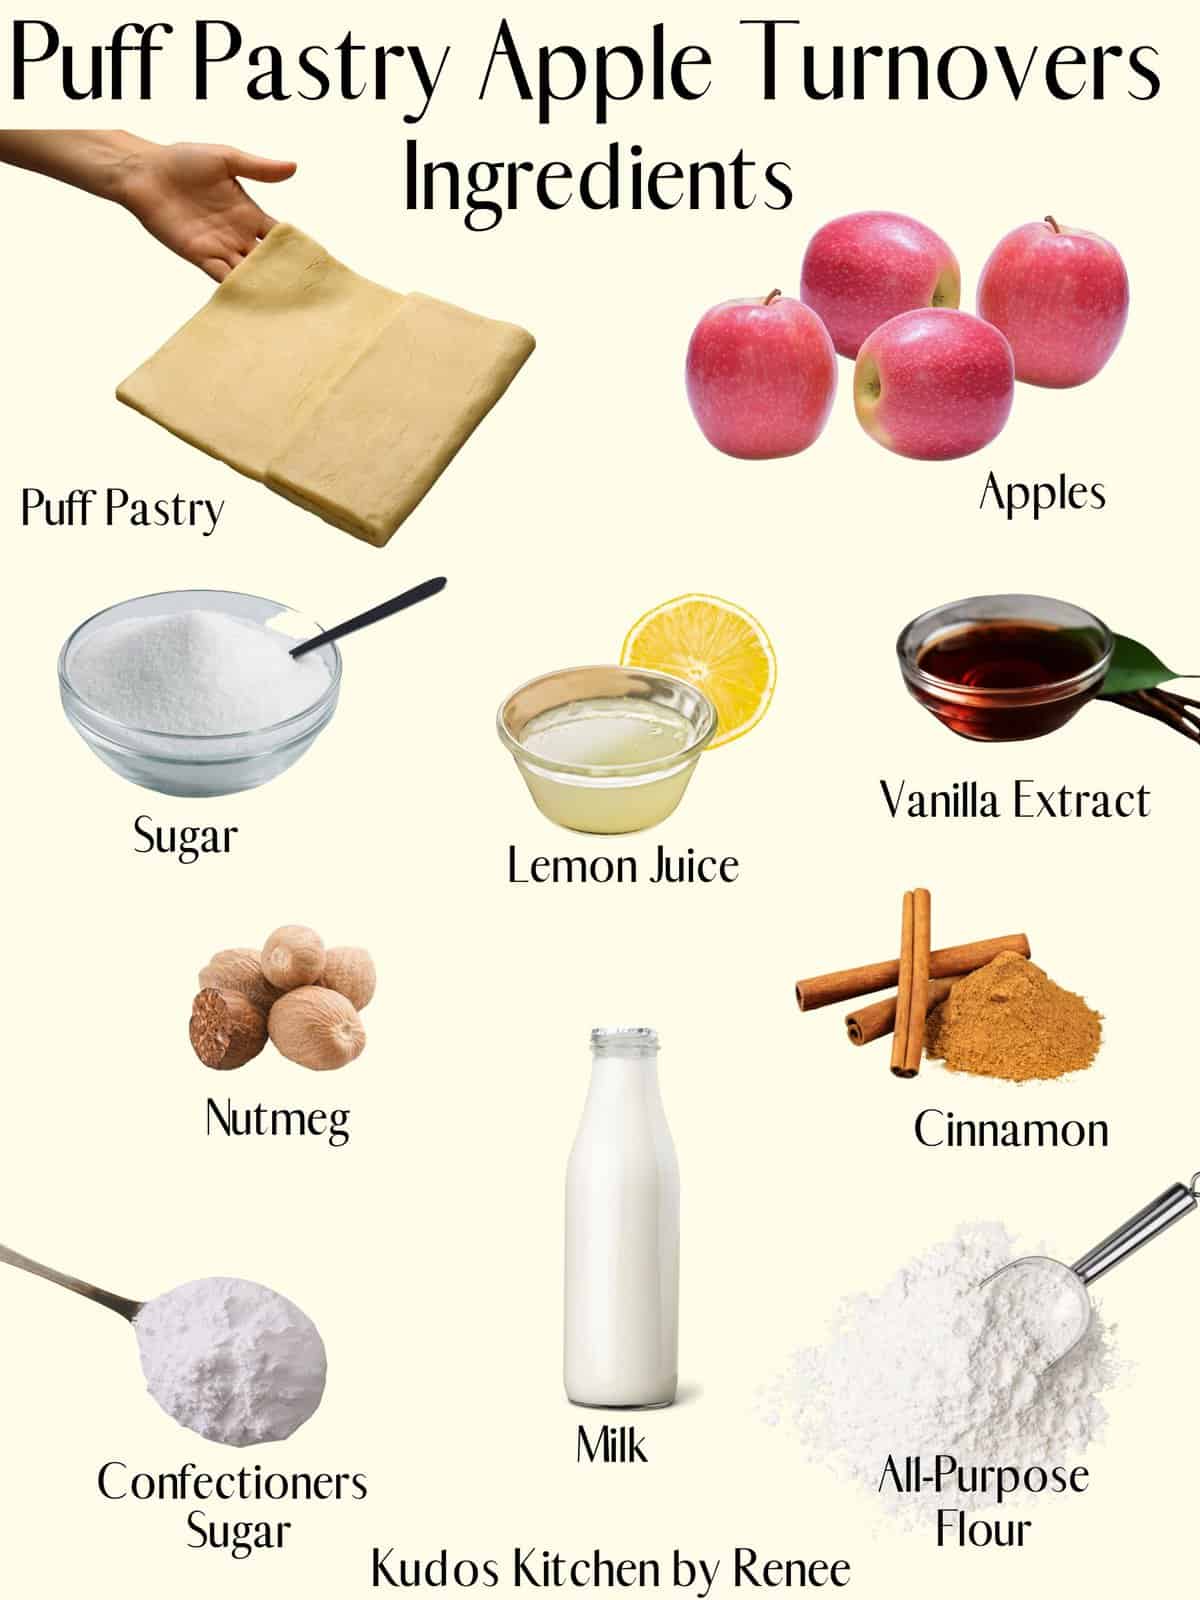 A visual list of ingredients for making Puff Pastry Apple Turnovers